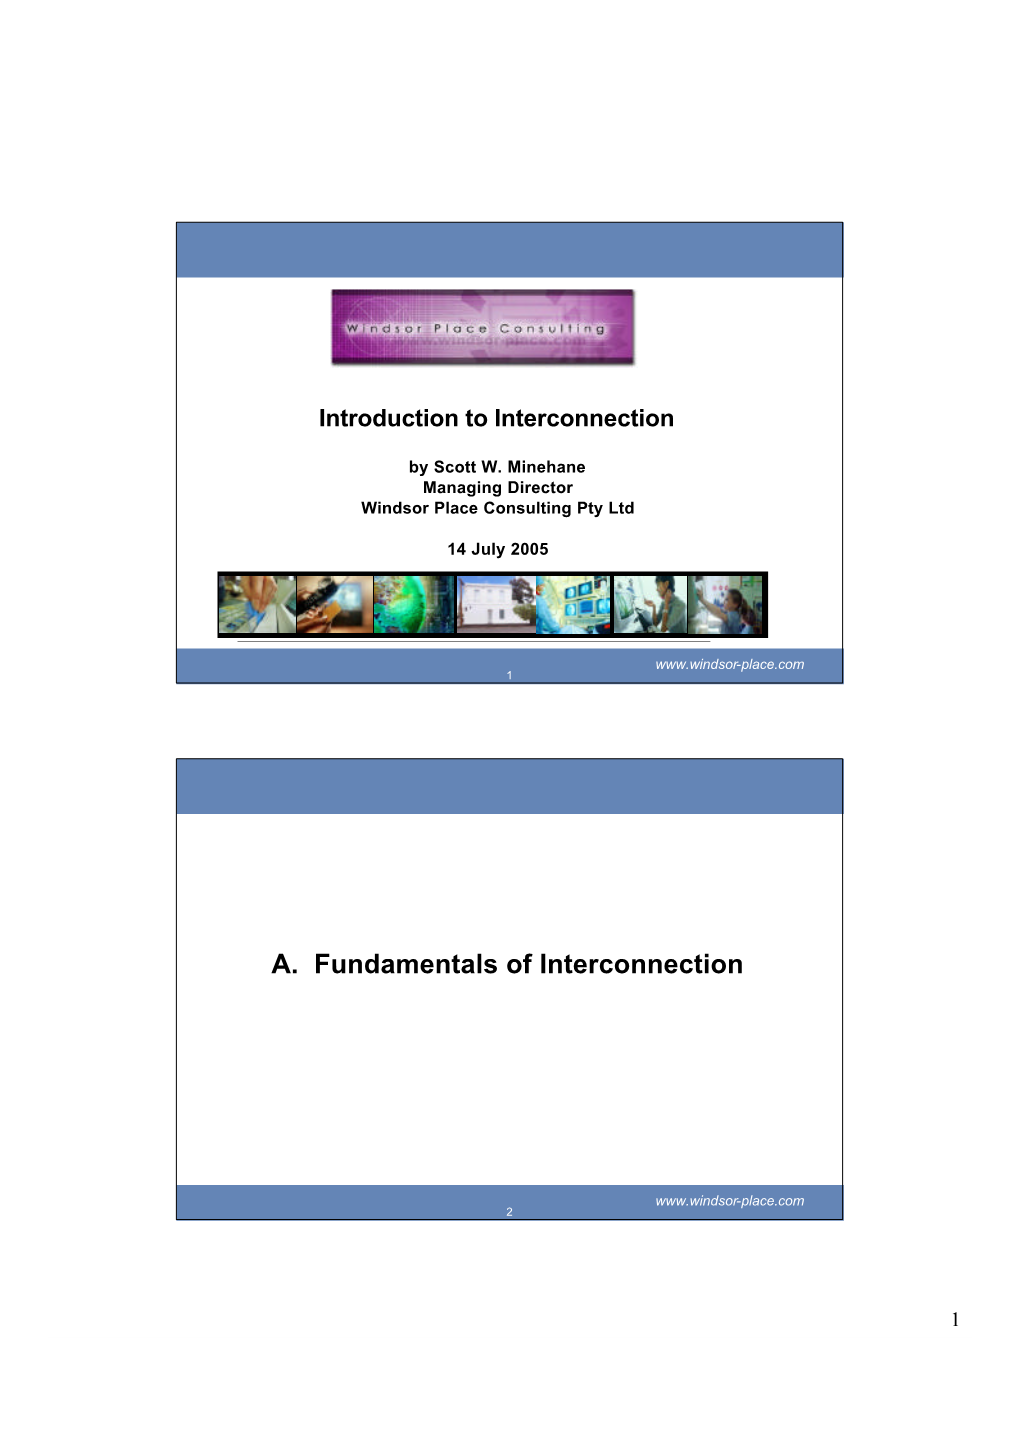 A. Fundamentals of Interconnection